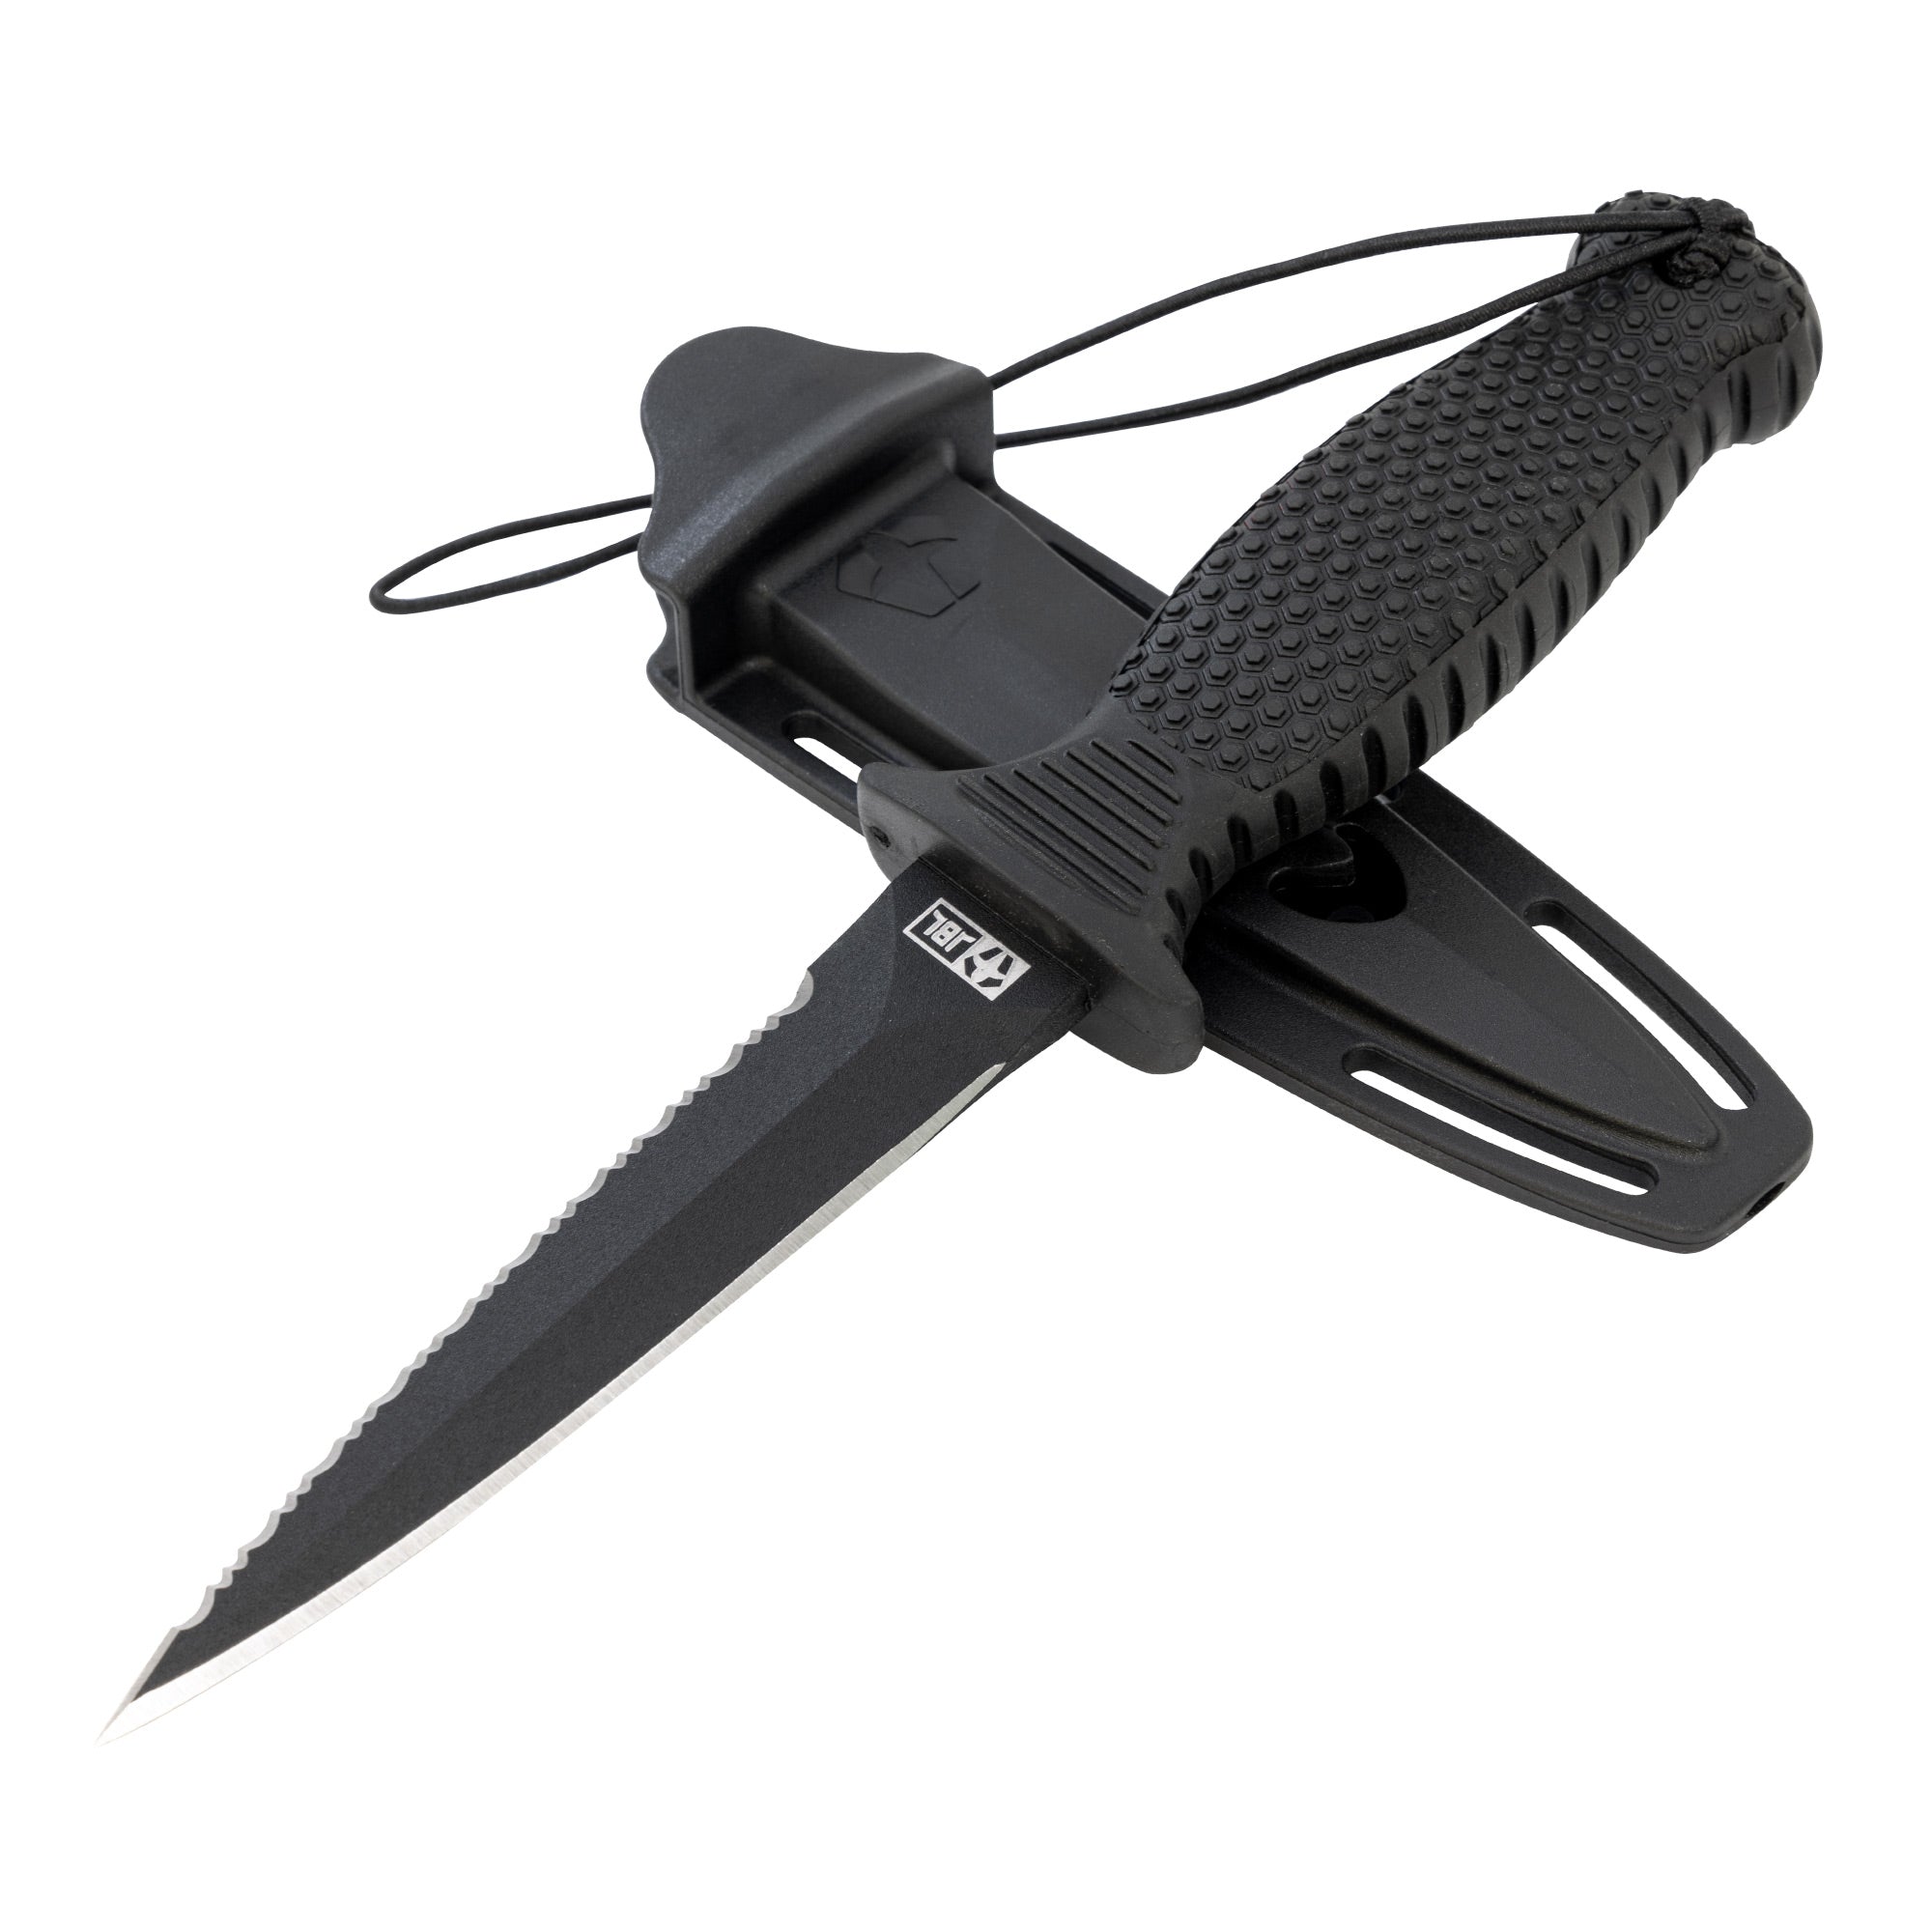 Best Budget Survival Knives: 10 Affordable Fixed Blade Options